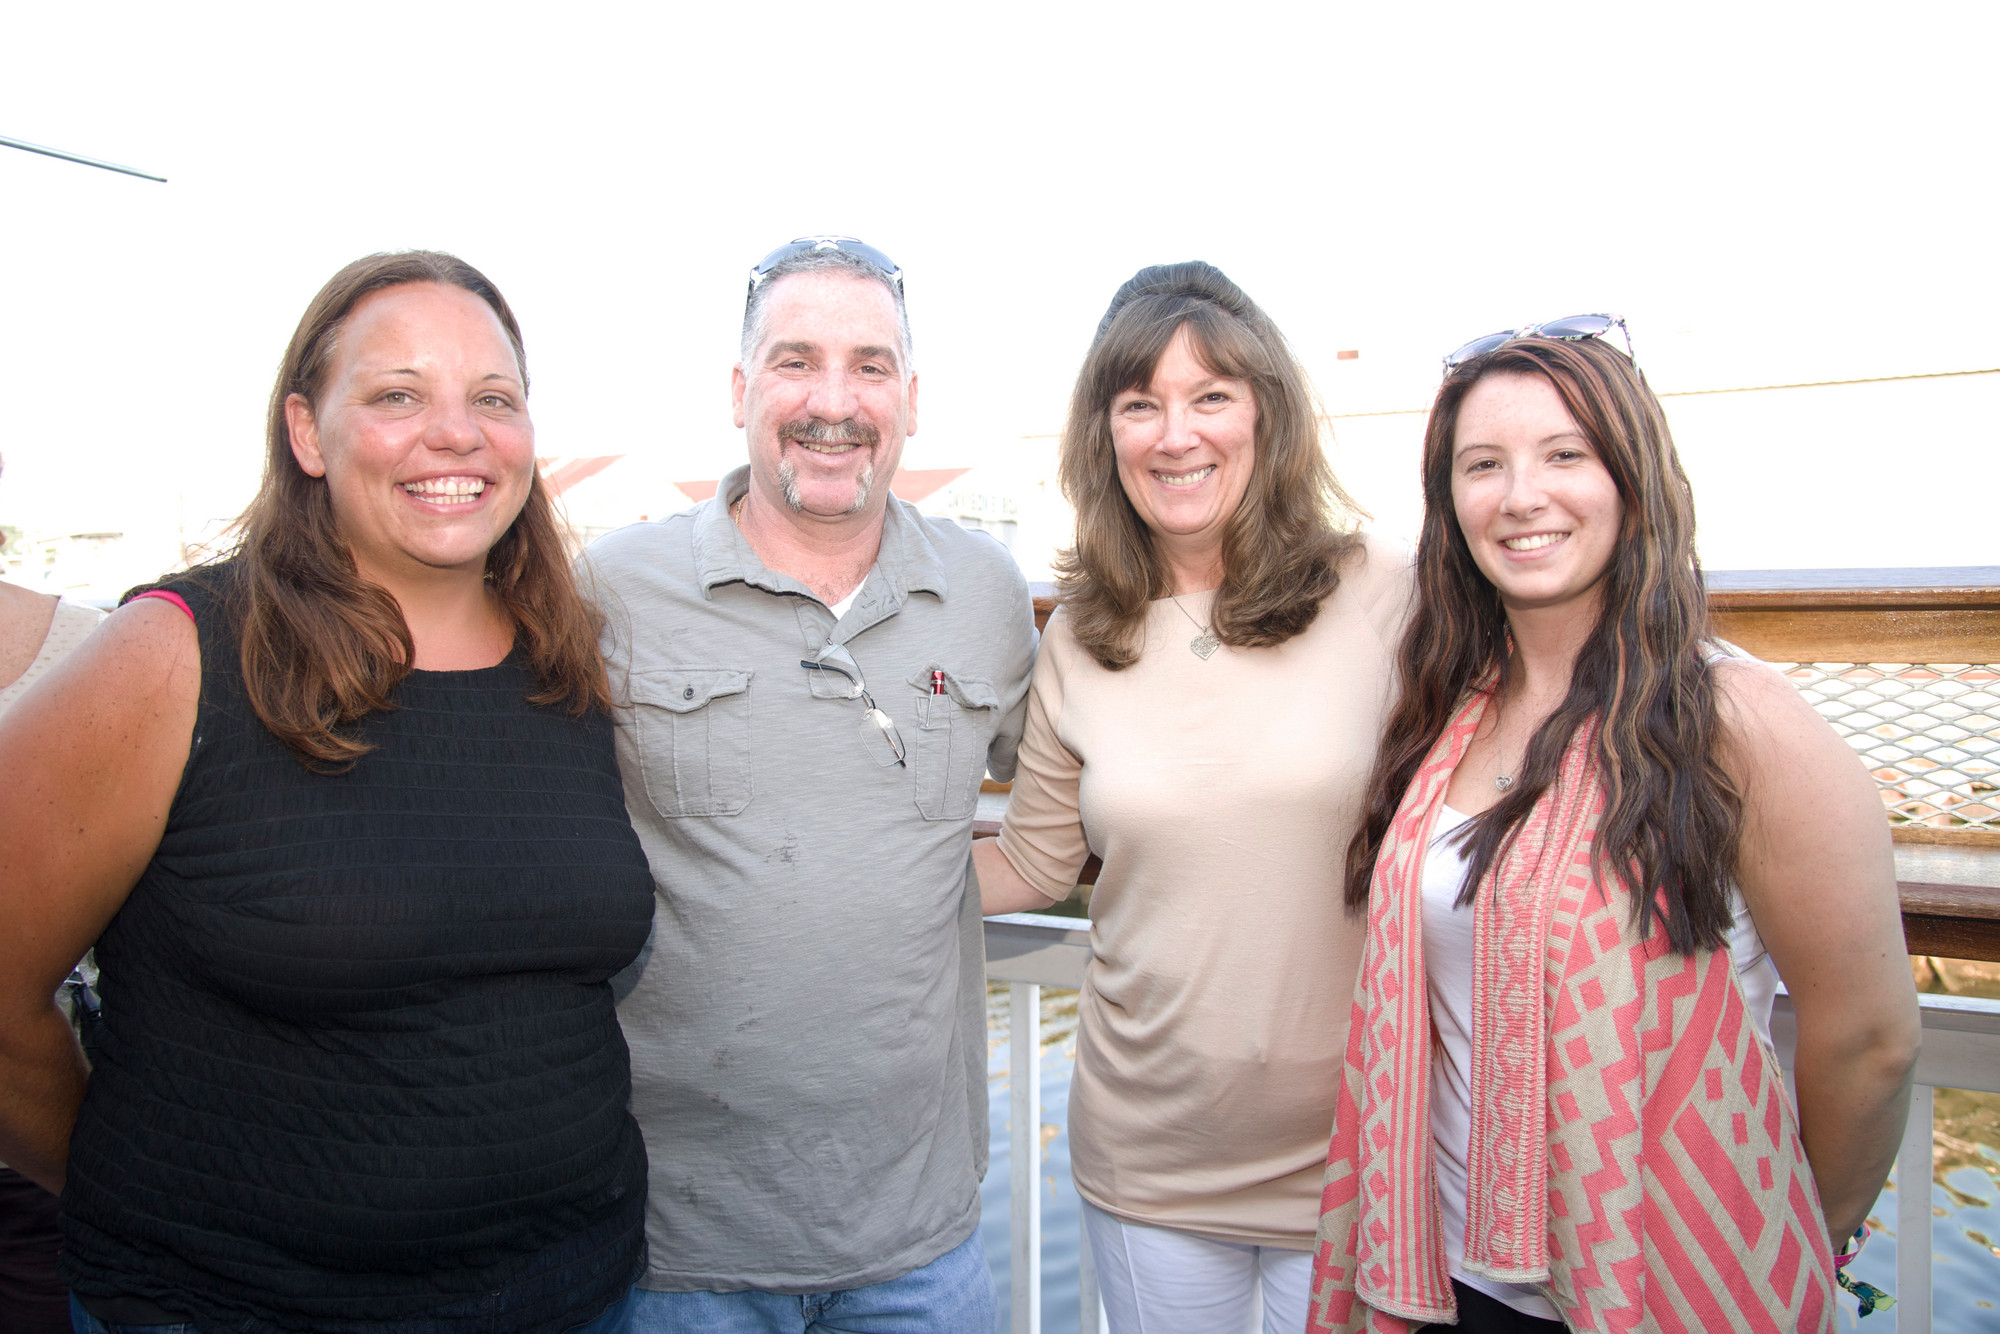 Dena Arnold,Ronald Roeill, Tammy Pacheco, Kimm Pacheco at the fishery in ER